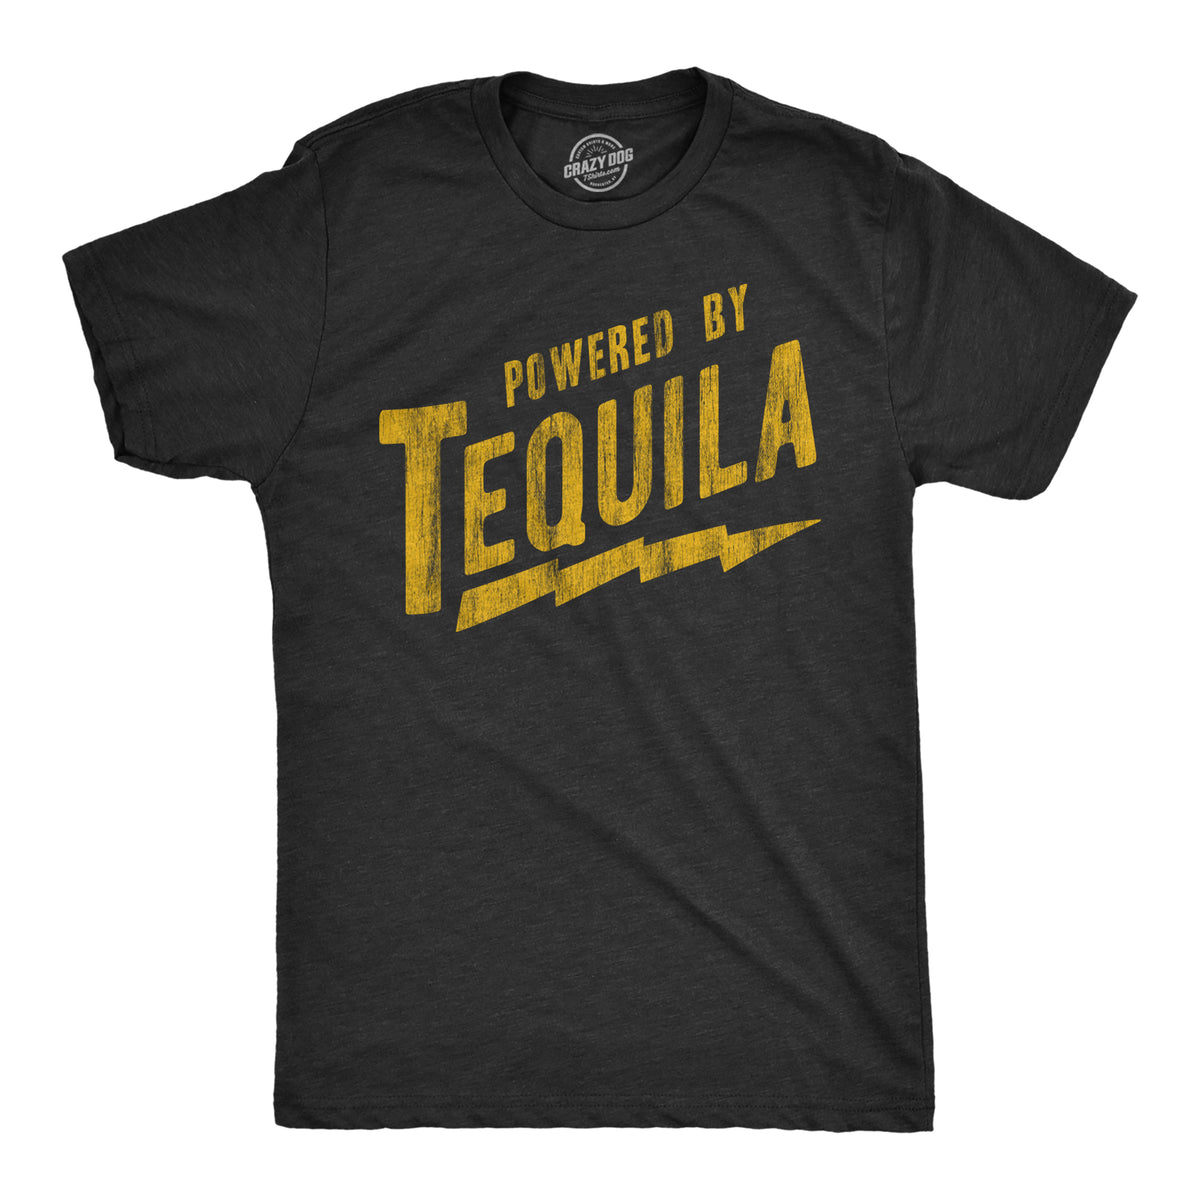 Funny Heather Black - TEQUILA Powered By Tequila Mens T Shirt Nerdy Drinking liquor Tee